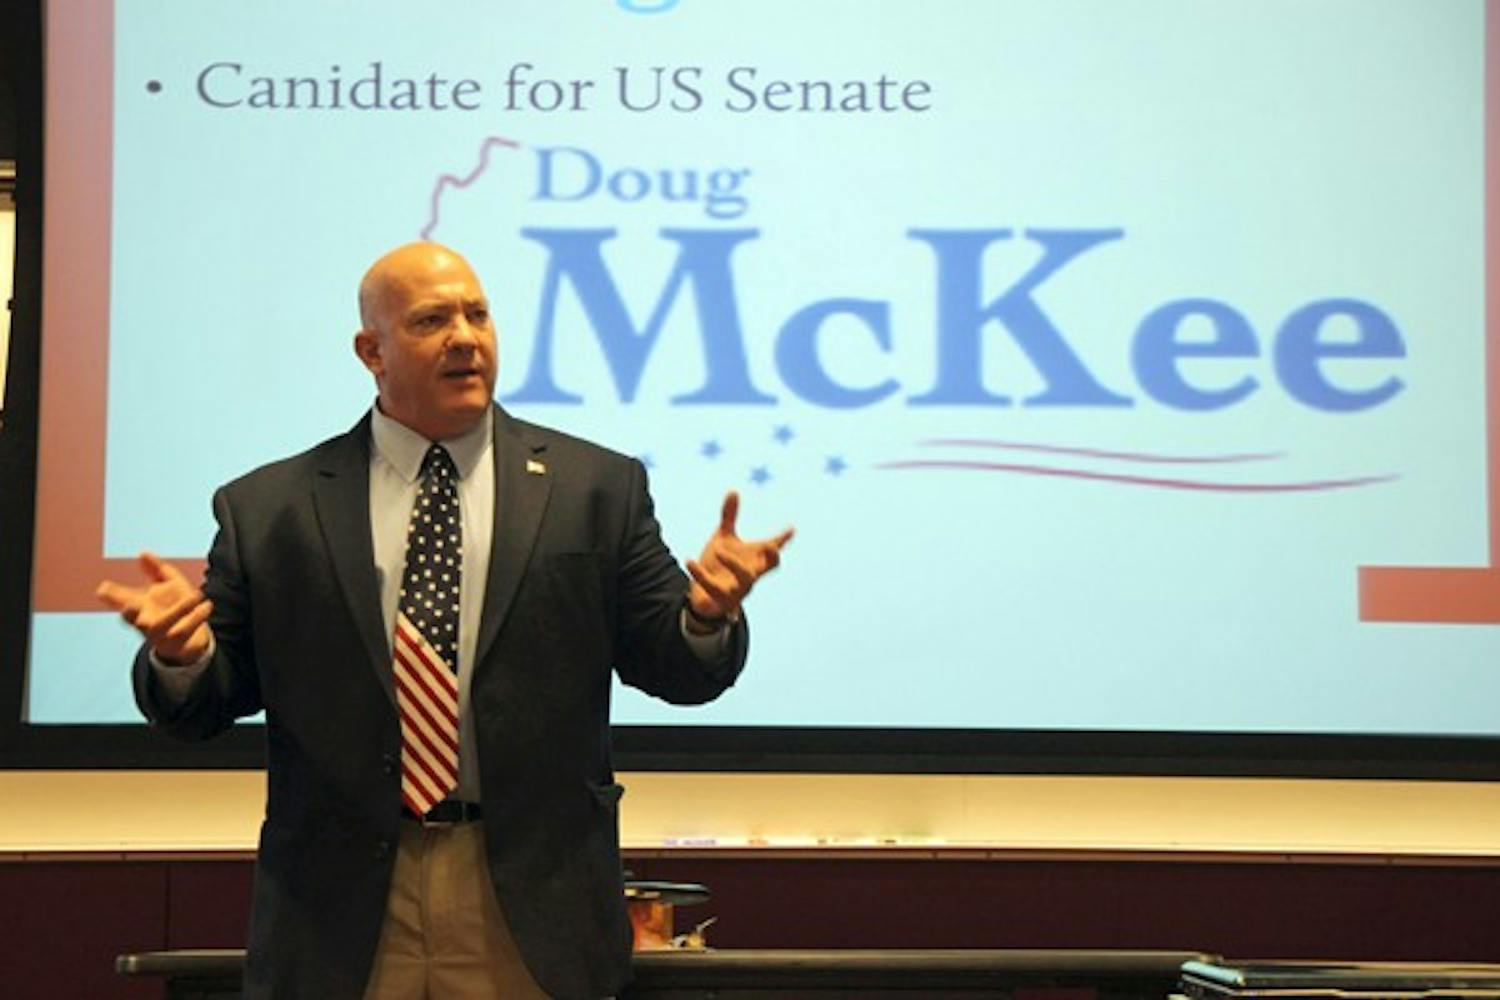 TALKING POLITICS: Senate candidate Doug McKee spoke and answered questions from the College Republicans in Coor Hall on the Tempe campus Thursday night. (Photo by Rosie Gochnour)